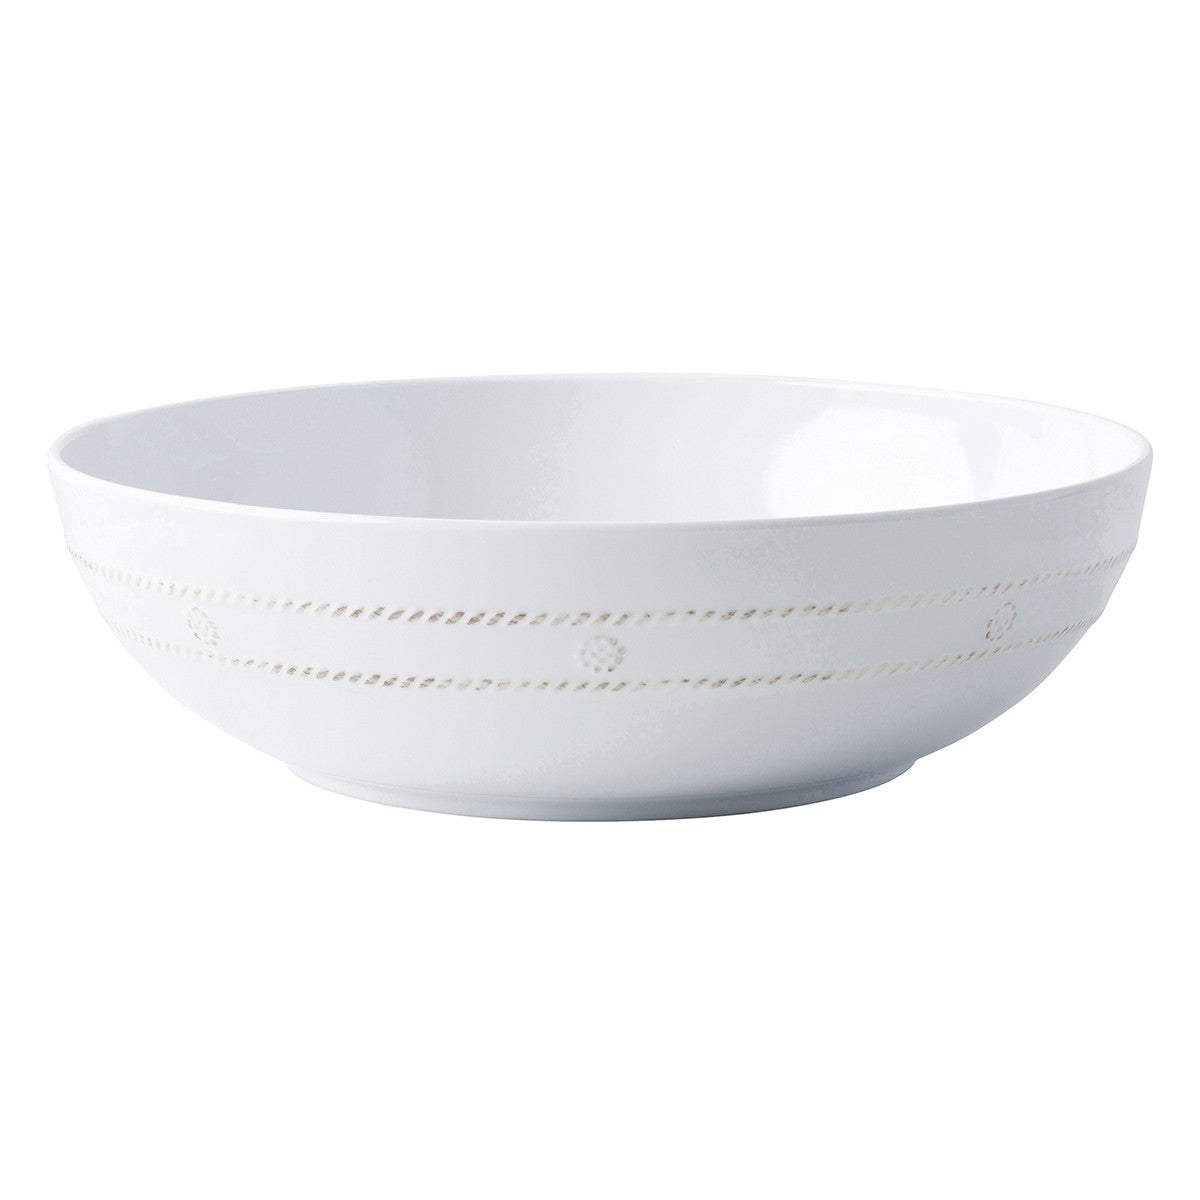 berry and thread large melamine serving bowl on a white background